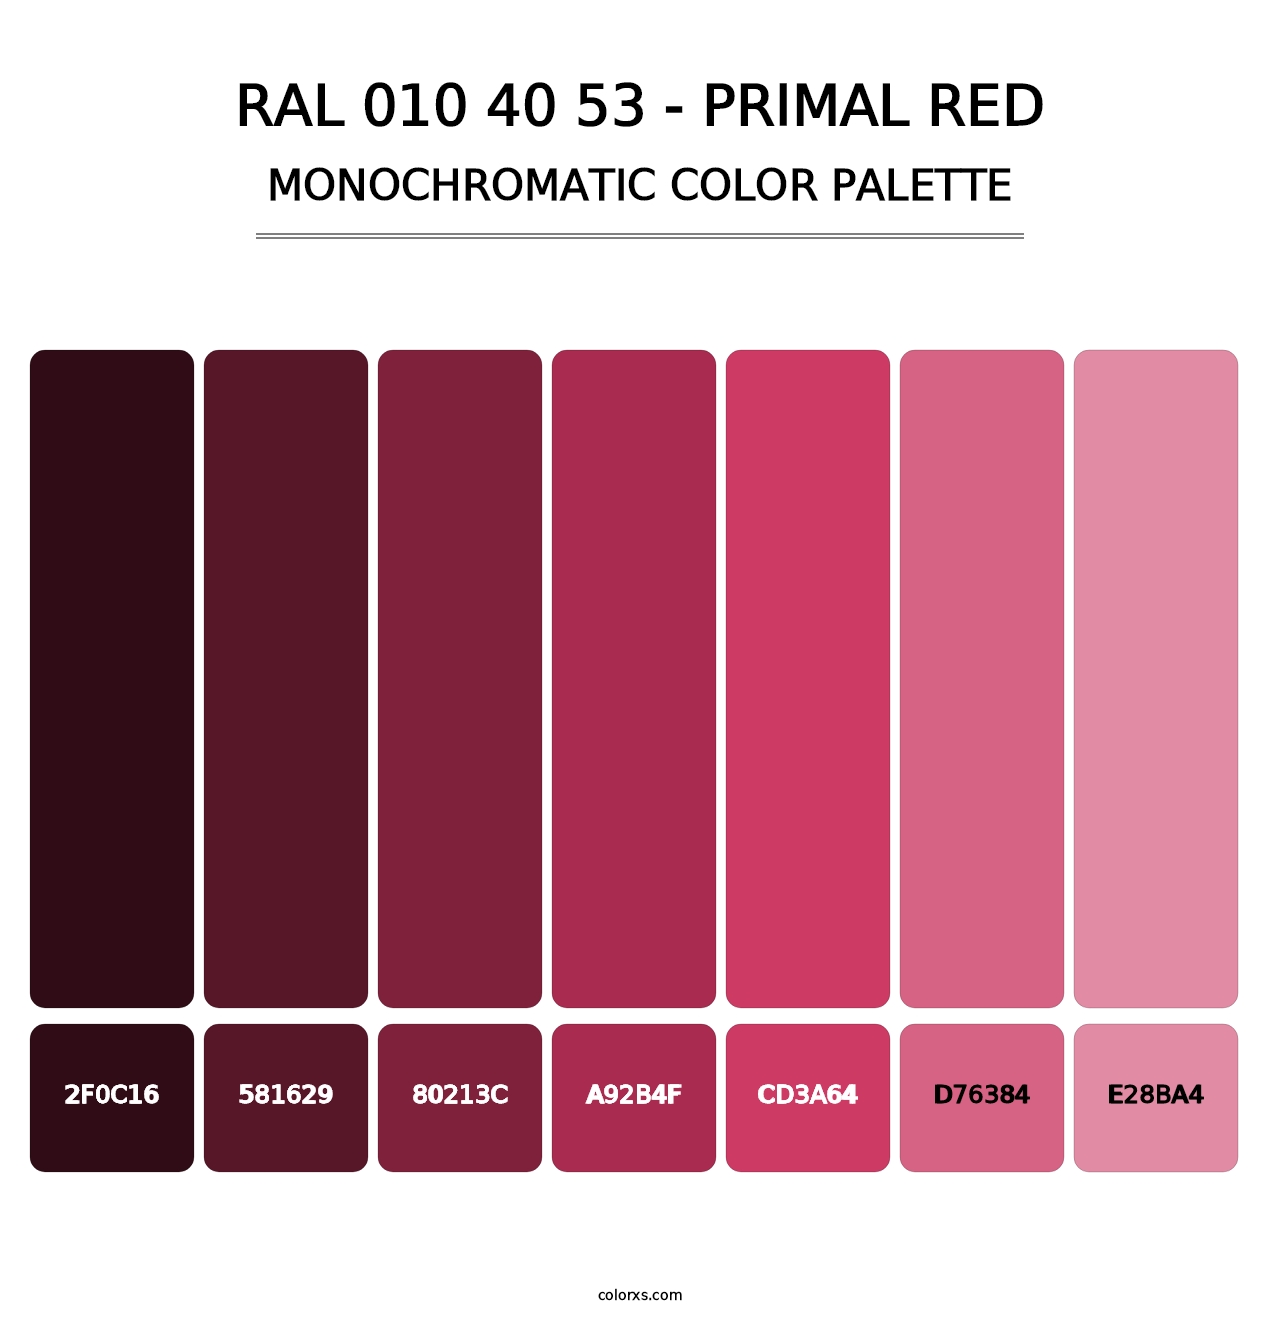 RAL 010 40 53 - Primal Red - Monochromatic Color Palette